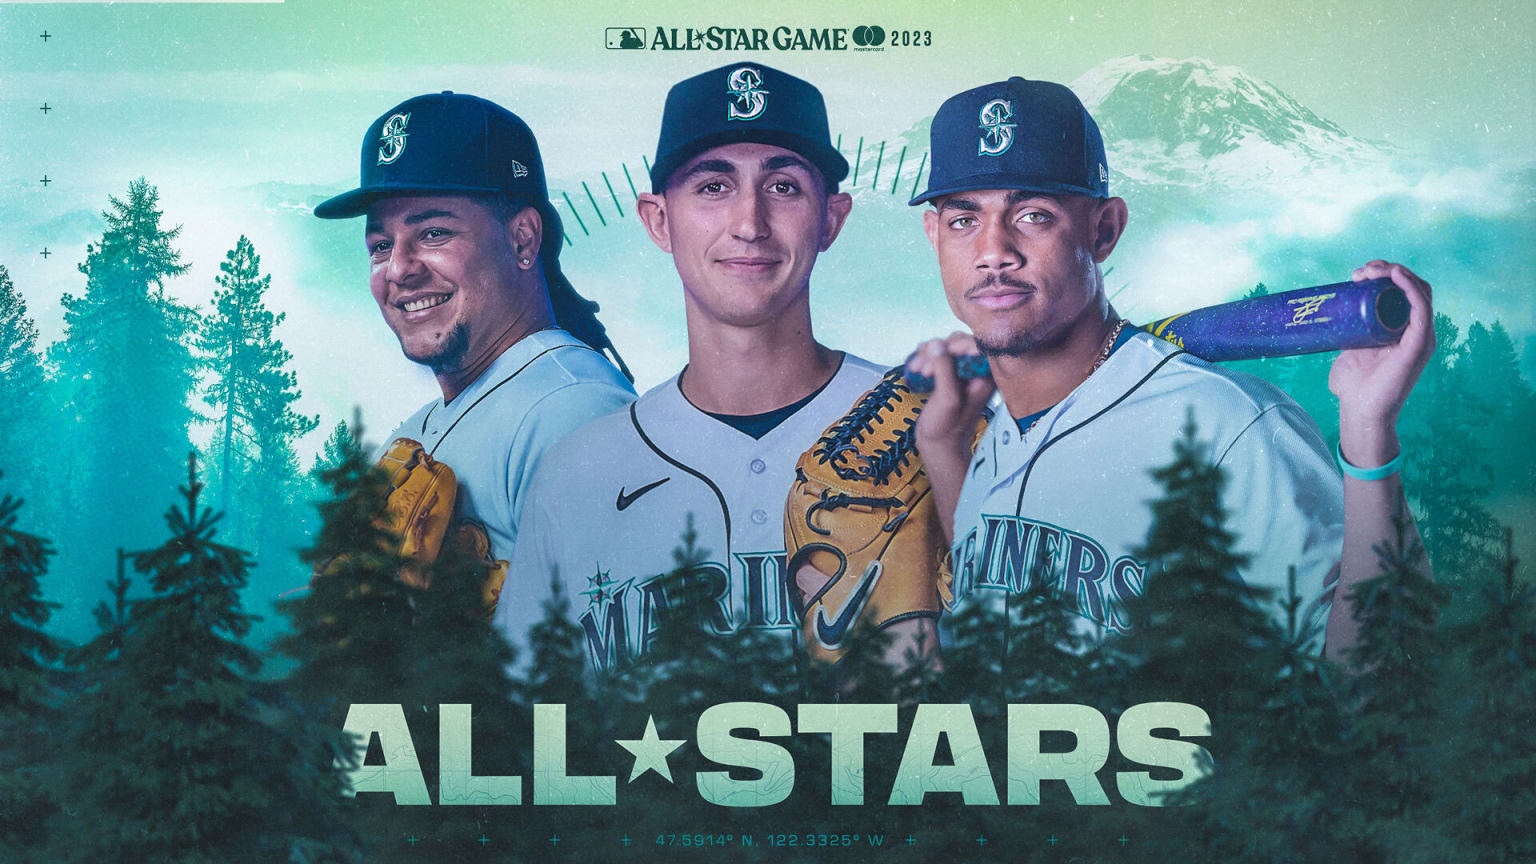 Photos: Major League Baseball All-Star Week wraps up in Seattle